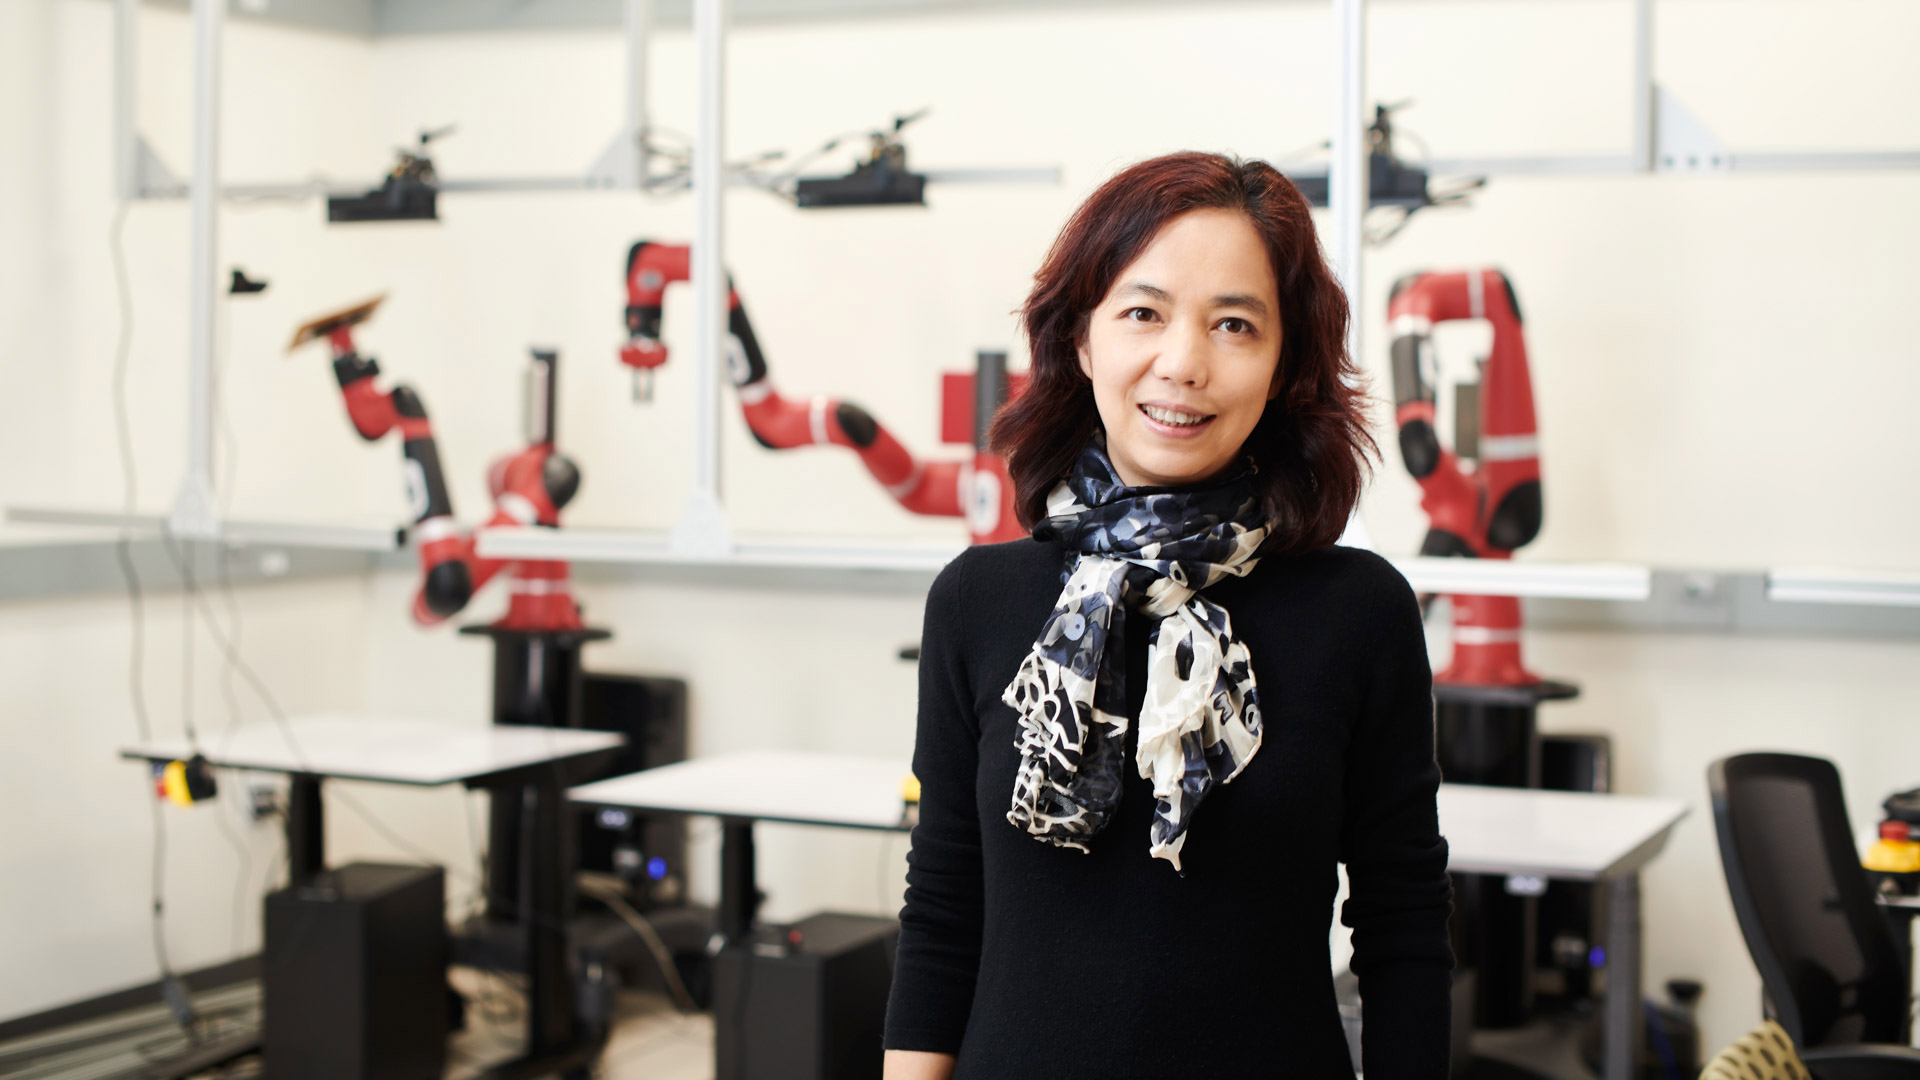 Fei-Fei Li standing in front of several red robot arms